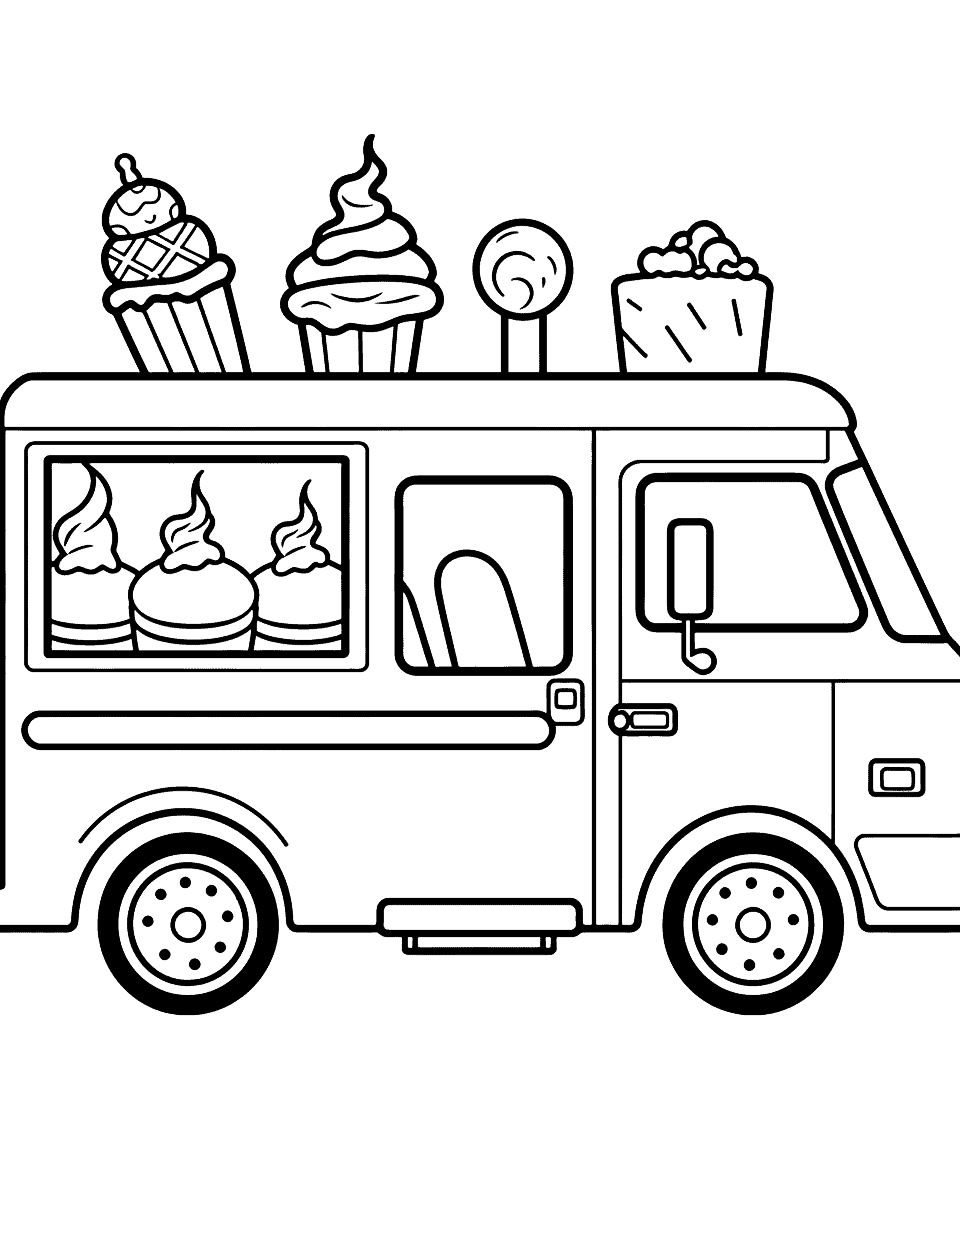 Ice Cream Truck Cute Coloring Page - A cheerful ice cream truck with colorful decorations and various ice cream flavors.